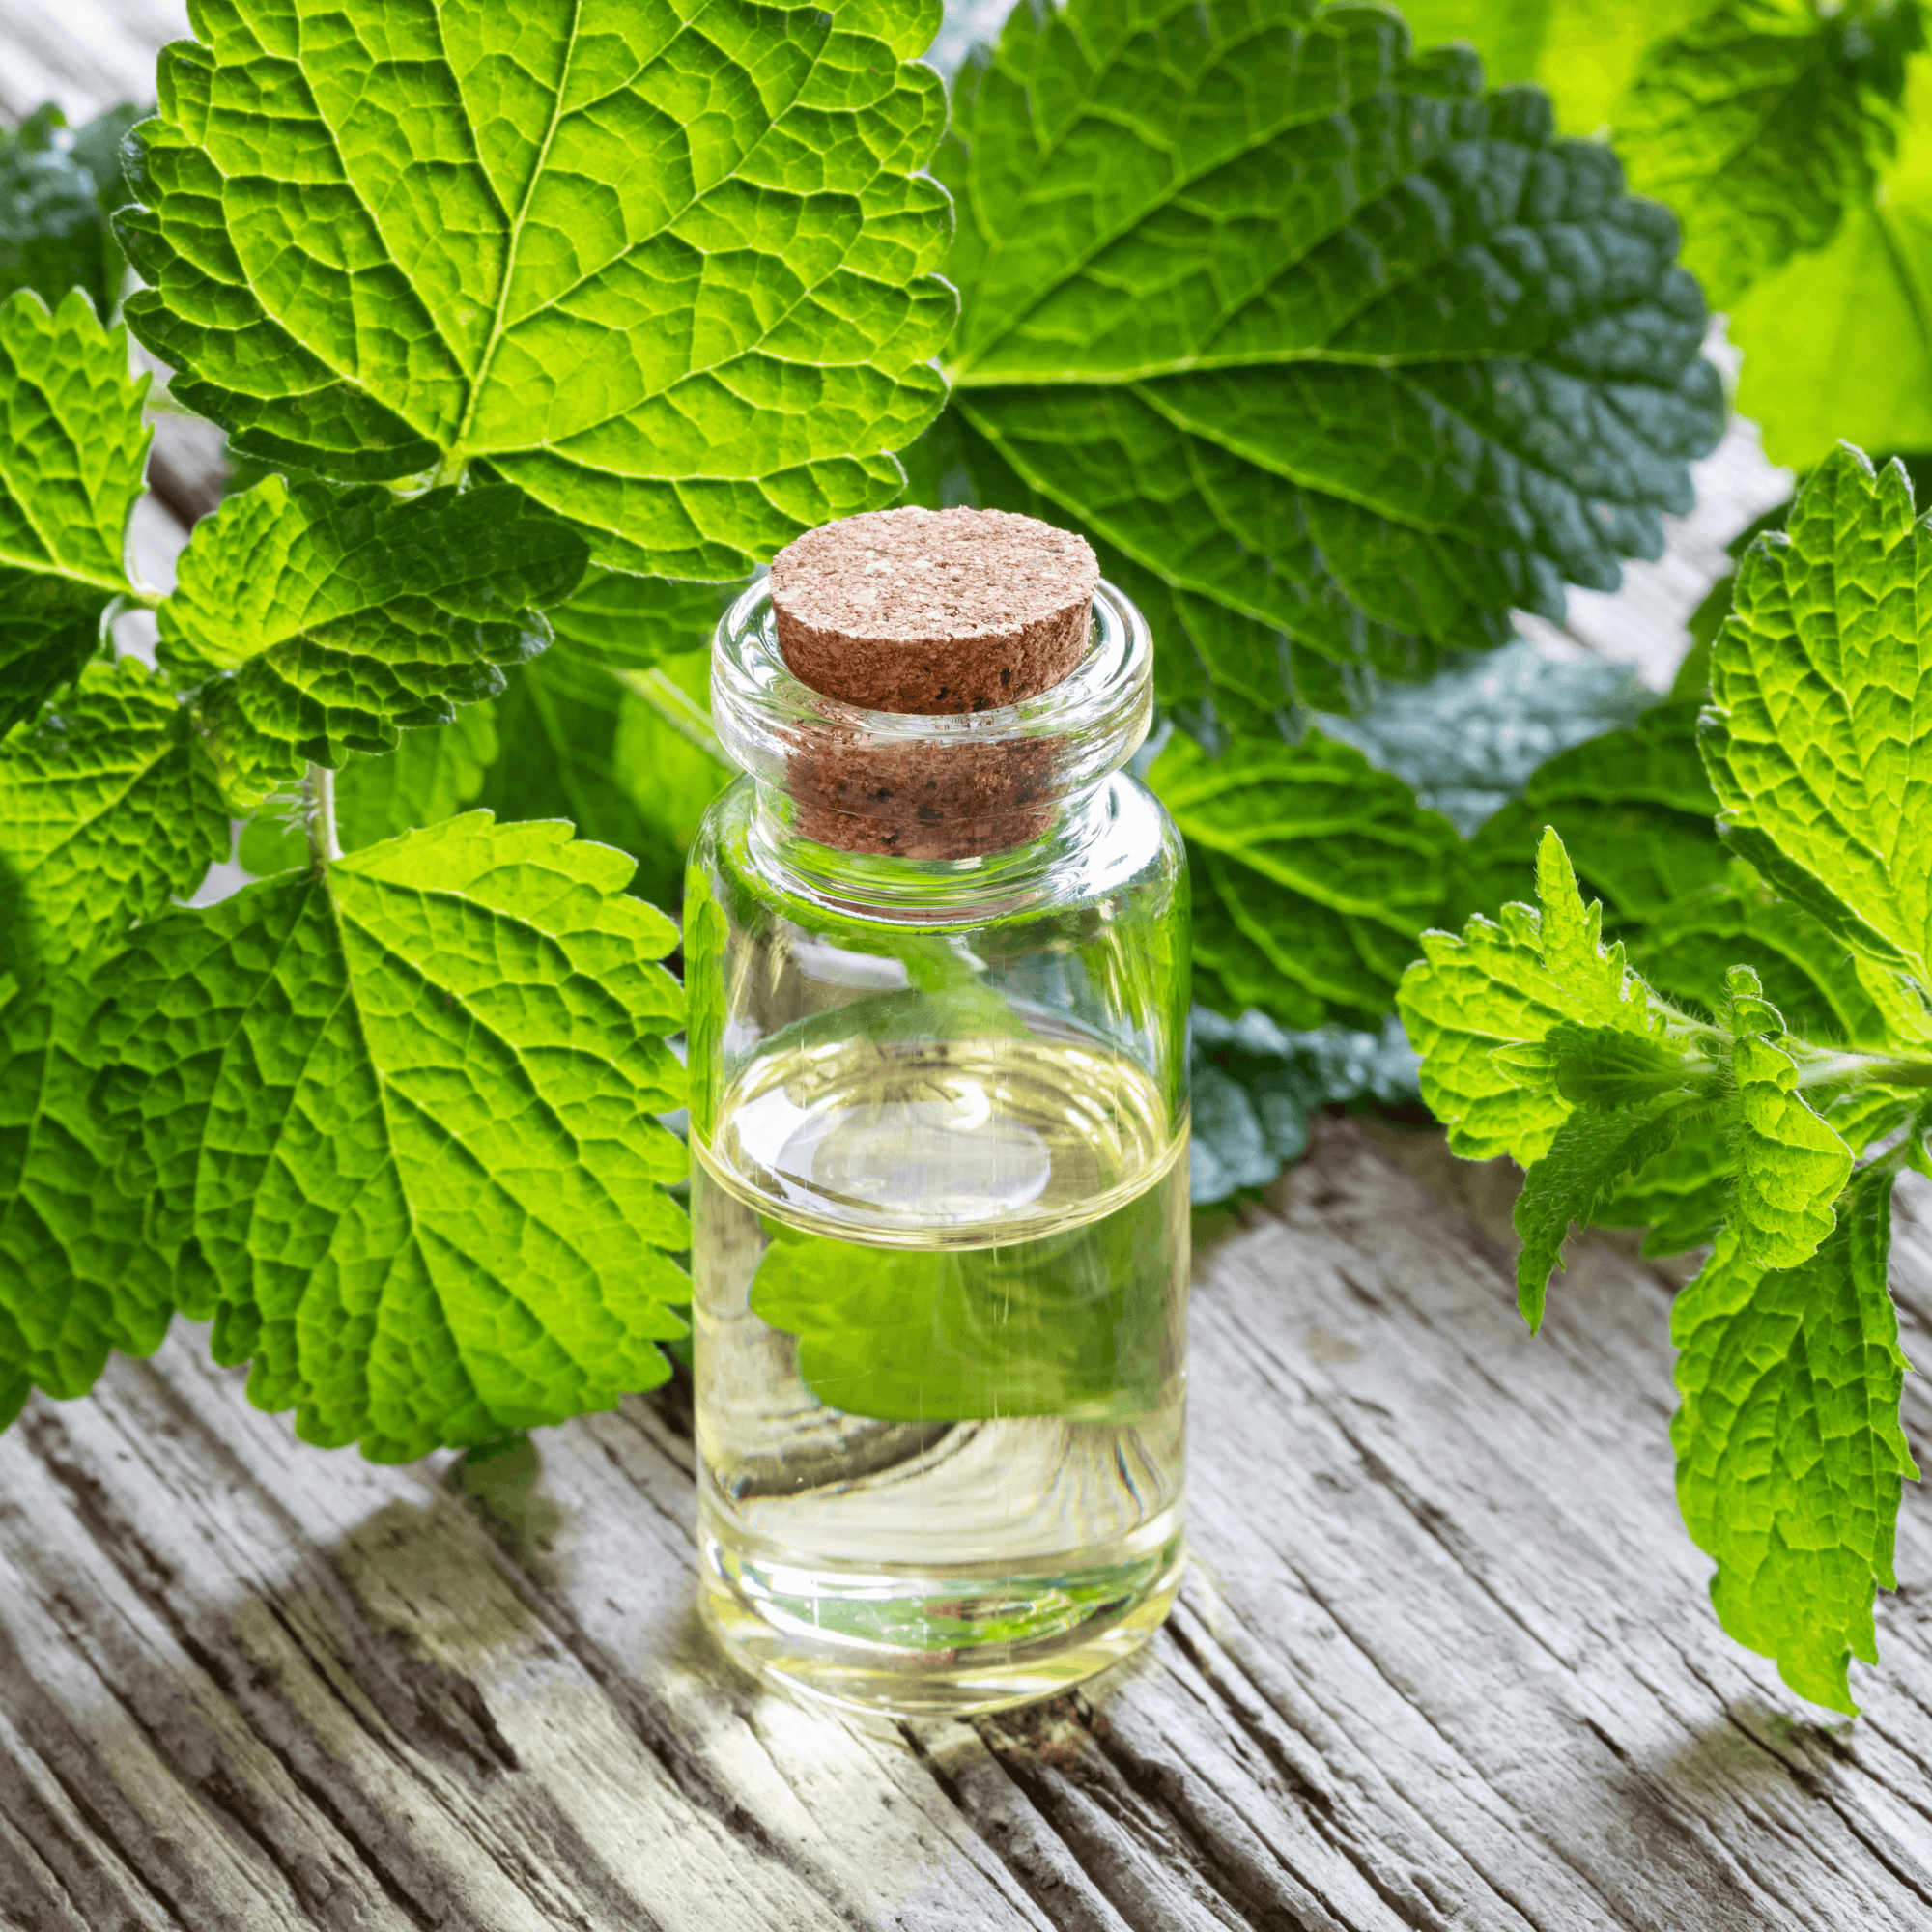 Be Bohemian Botanical Sea Serum Lemon Balm. Fragrant lemon leaves surround a corked see-through glass bottle filled with a shimmering liquid sitting on top of a used wooden table.